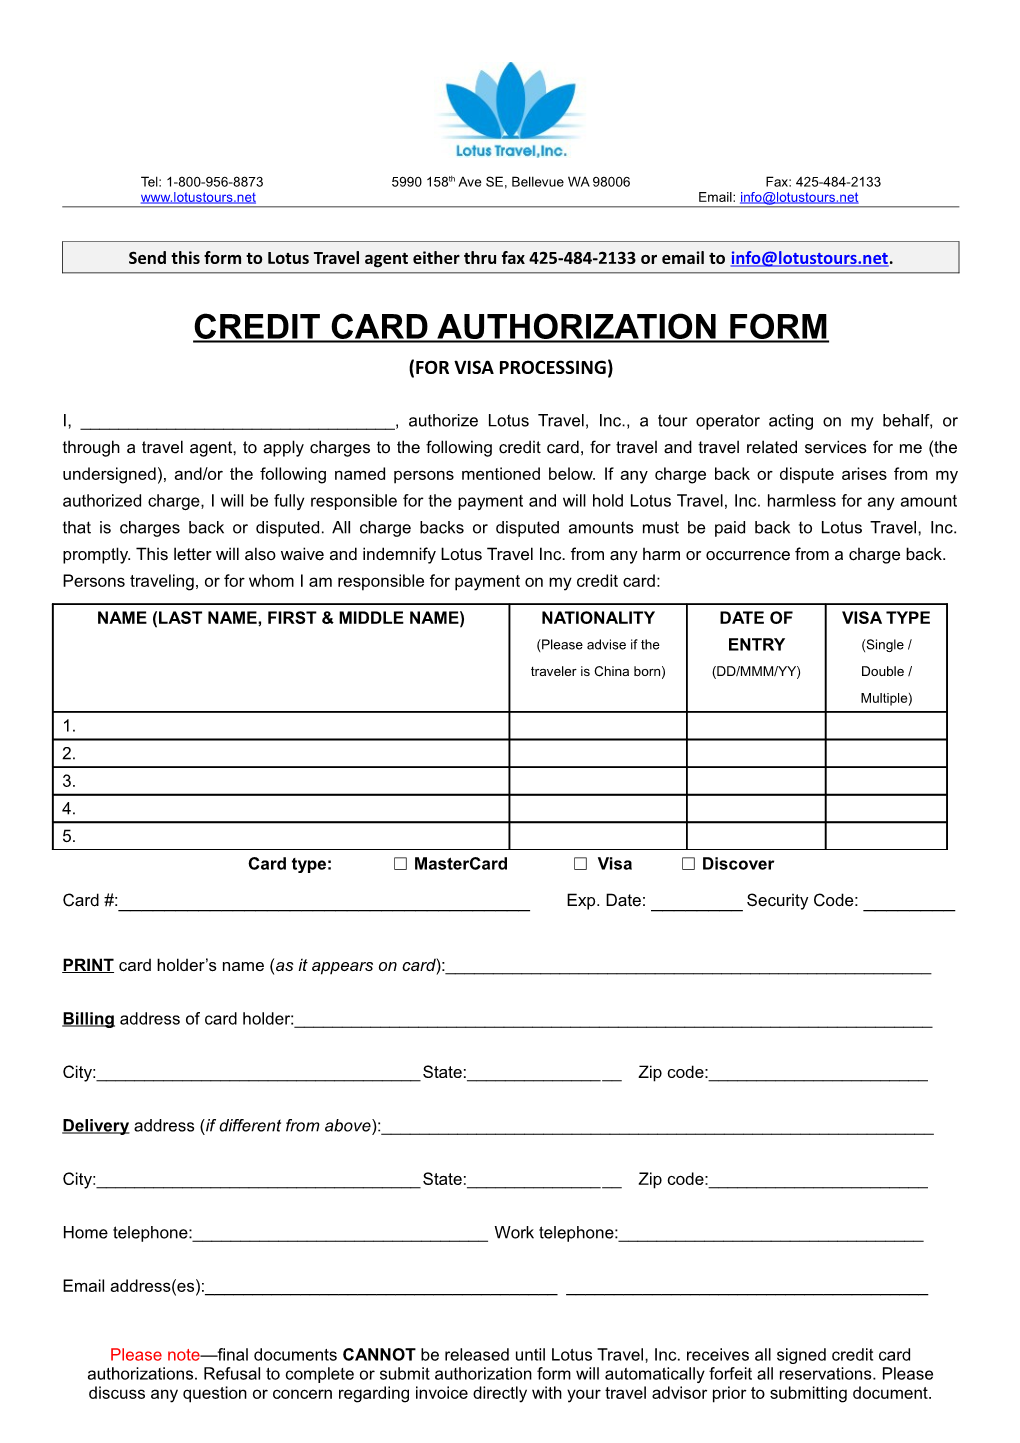 Credit Card Authorization Form s3